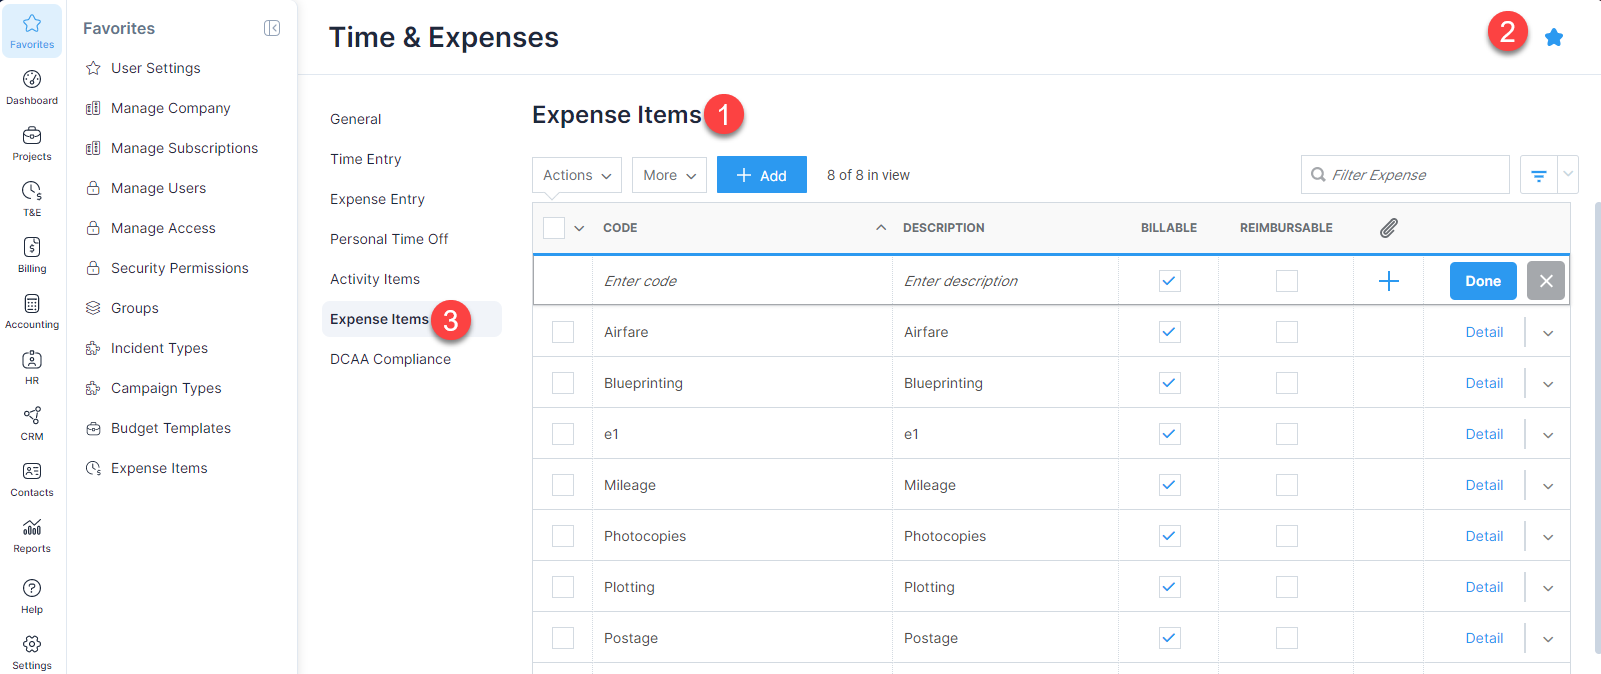 Expense Items- Mark as Fav.png